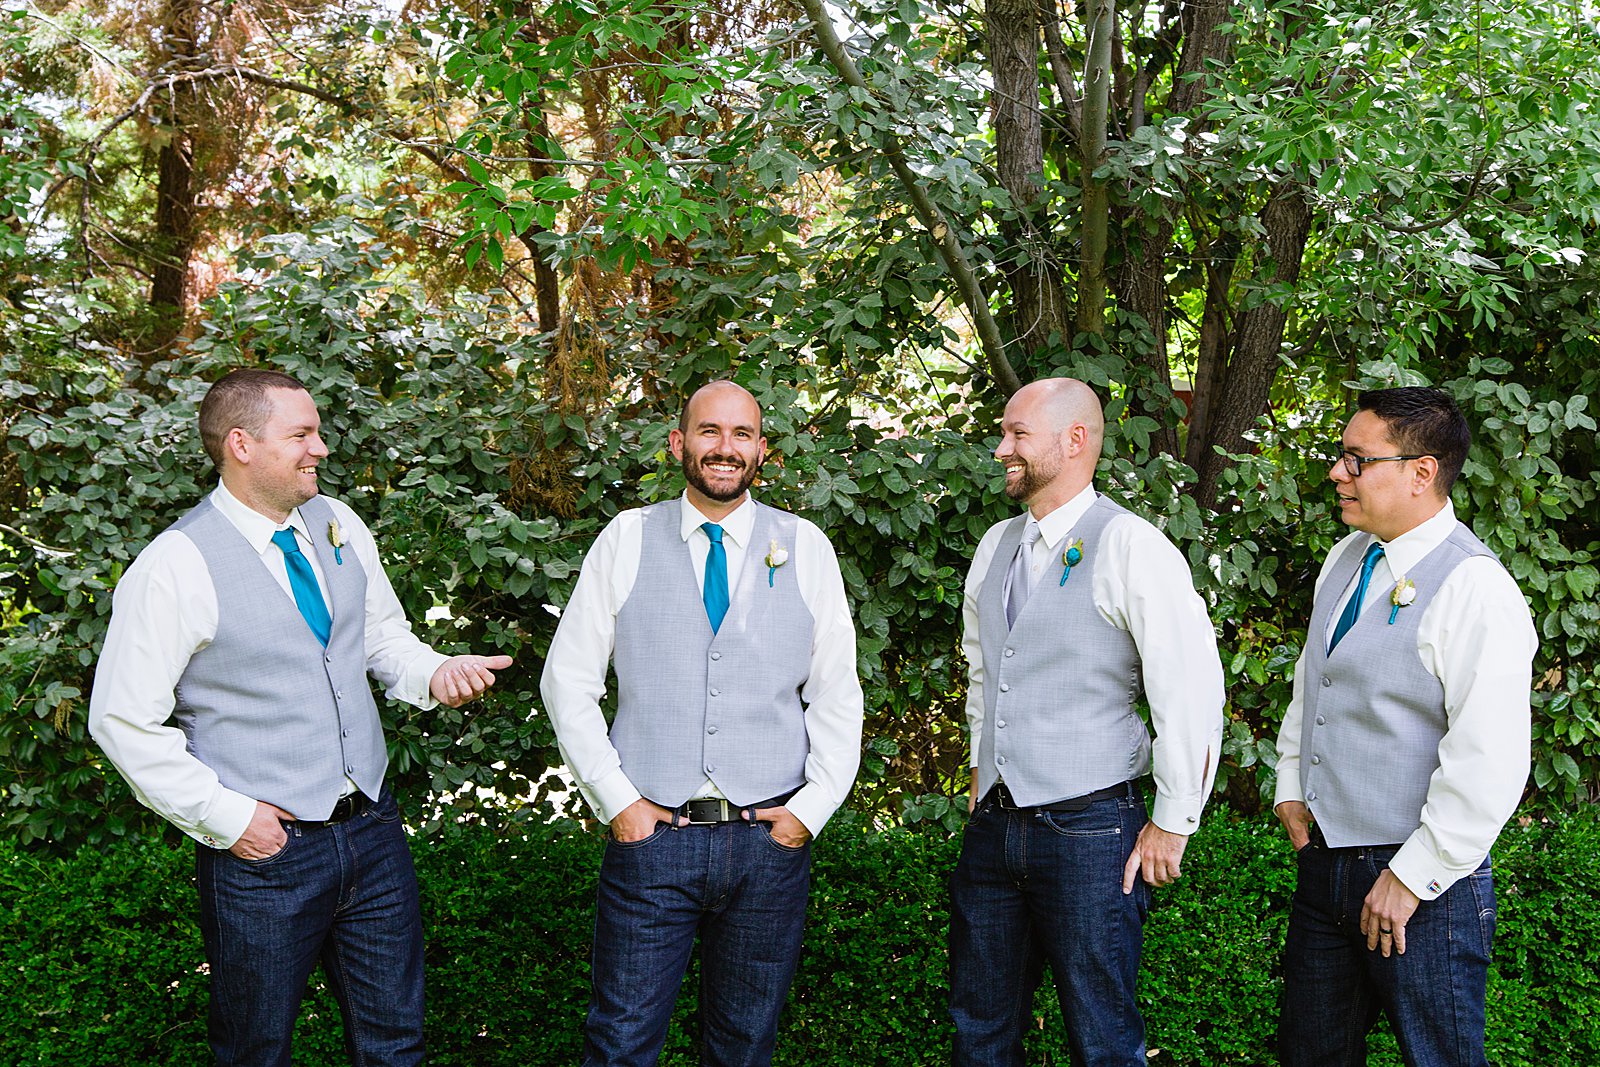 Groom and groomsmen laughing together at The Windmill House wedding by Chino Valley wedding photographer PMA Photography.